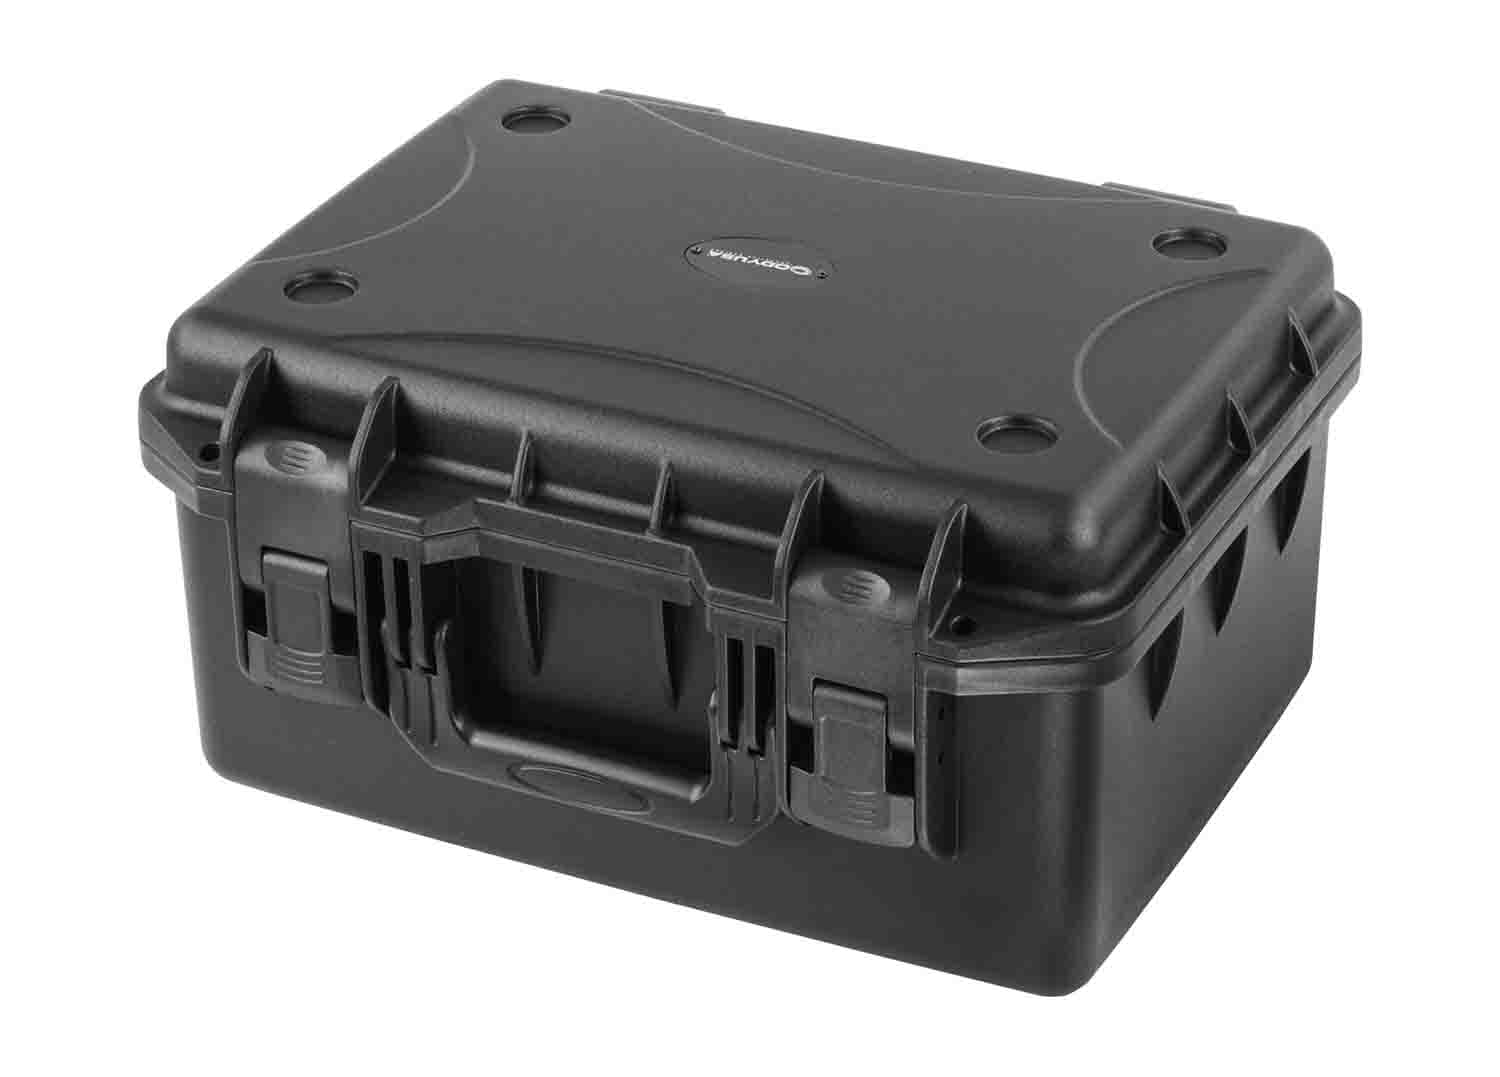 Odyssey VU151008 Vulcan Injection-Molded Utility Case with Pluck Foam - 15.25 x 10.5 x 6.25" Interior - Hollywood DJ